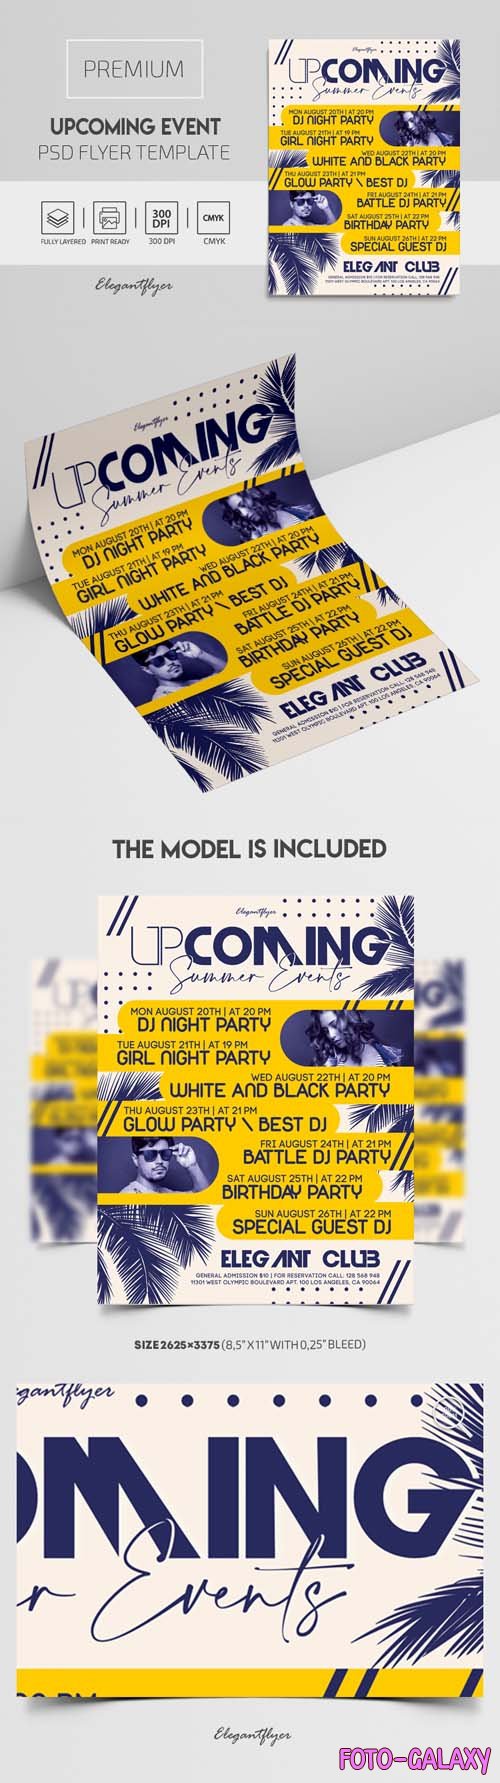 Upcoming Event Premium PSD Flyer Template